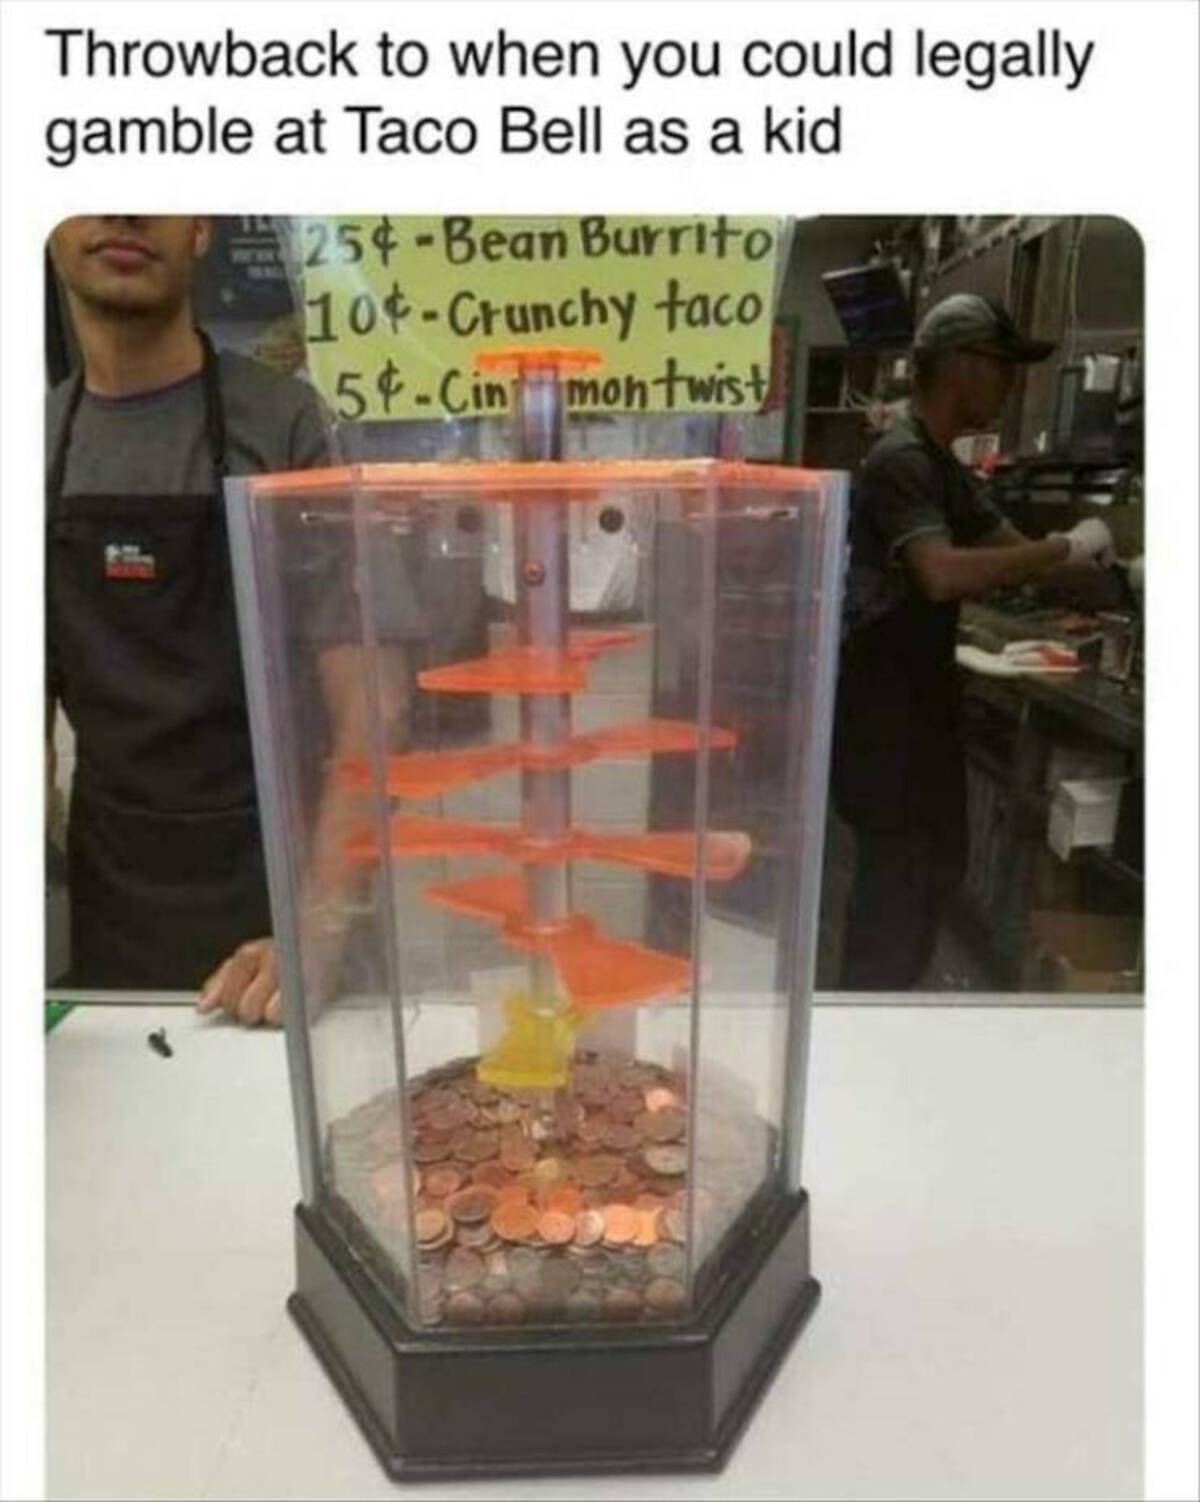 taco bell coin drop game - Throwback to when you could legally gamble at Taco Bell as a kid 254Bean Burrito 10Crunchy taco 54Cini montwist